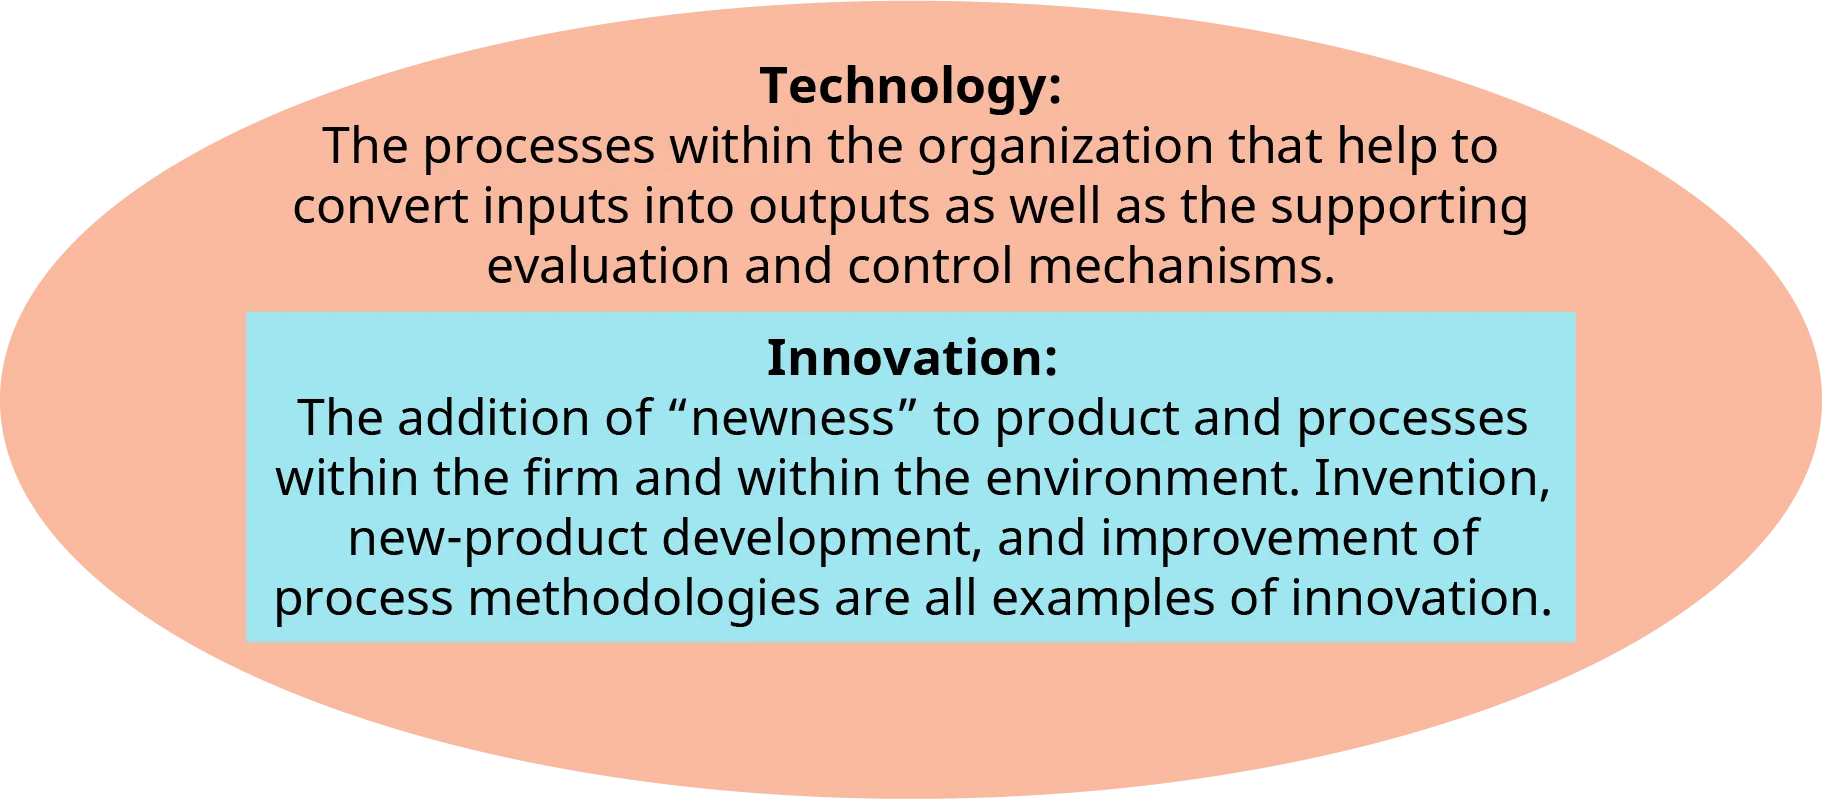 An illustration shows the definitions of the terms “Technology” and “Innovation” superimposed inside an oval.